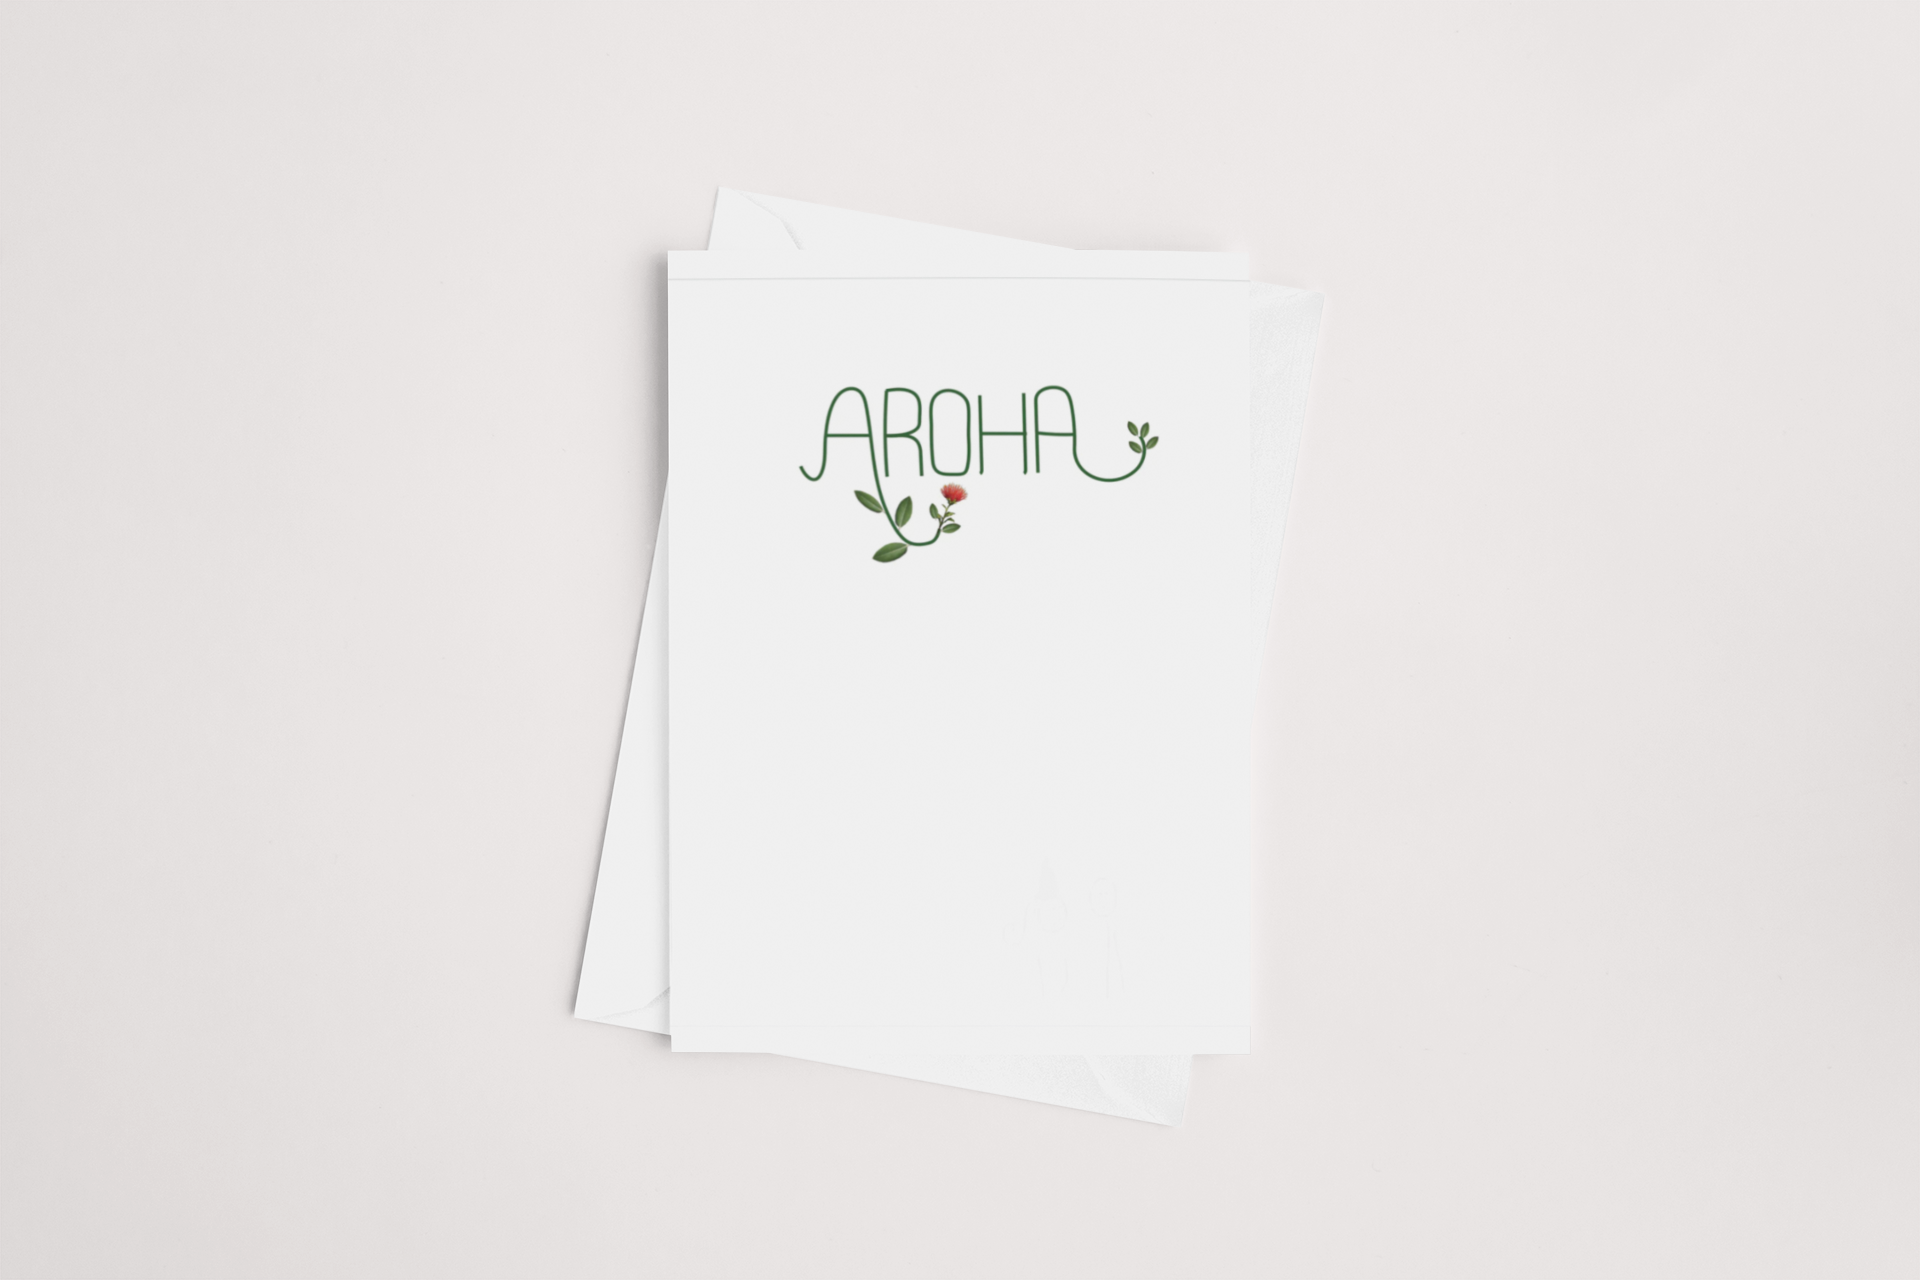 A Aroha Card, product of New Zealand, with the word "aroha" (which means "love" in Māori) written on it, featuring small green decorative elements that resemble plant.